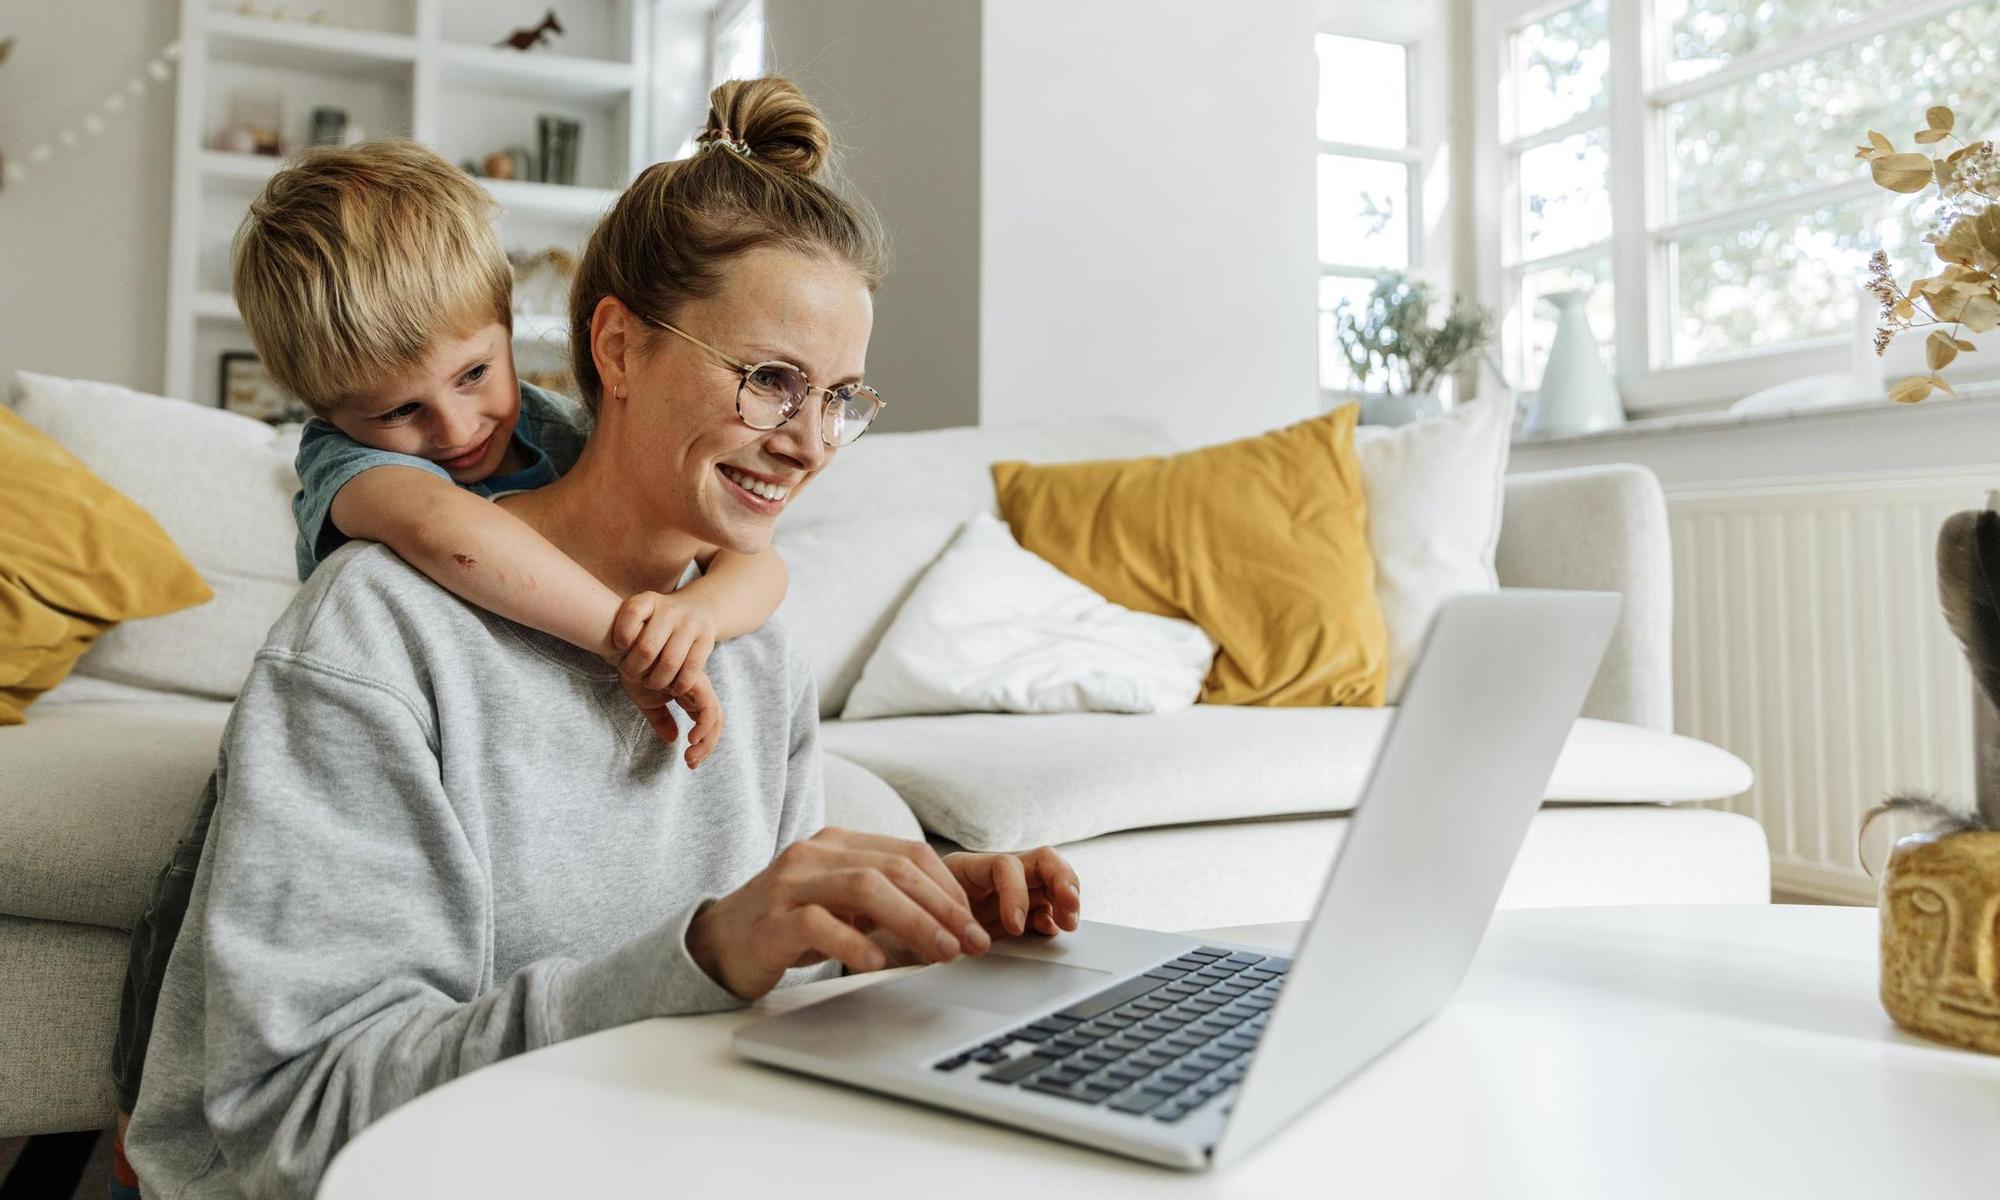 Mother and child using a laptop together in their living room